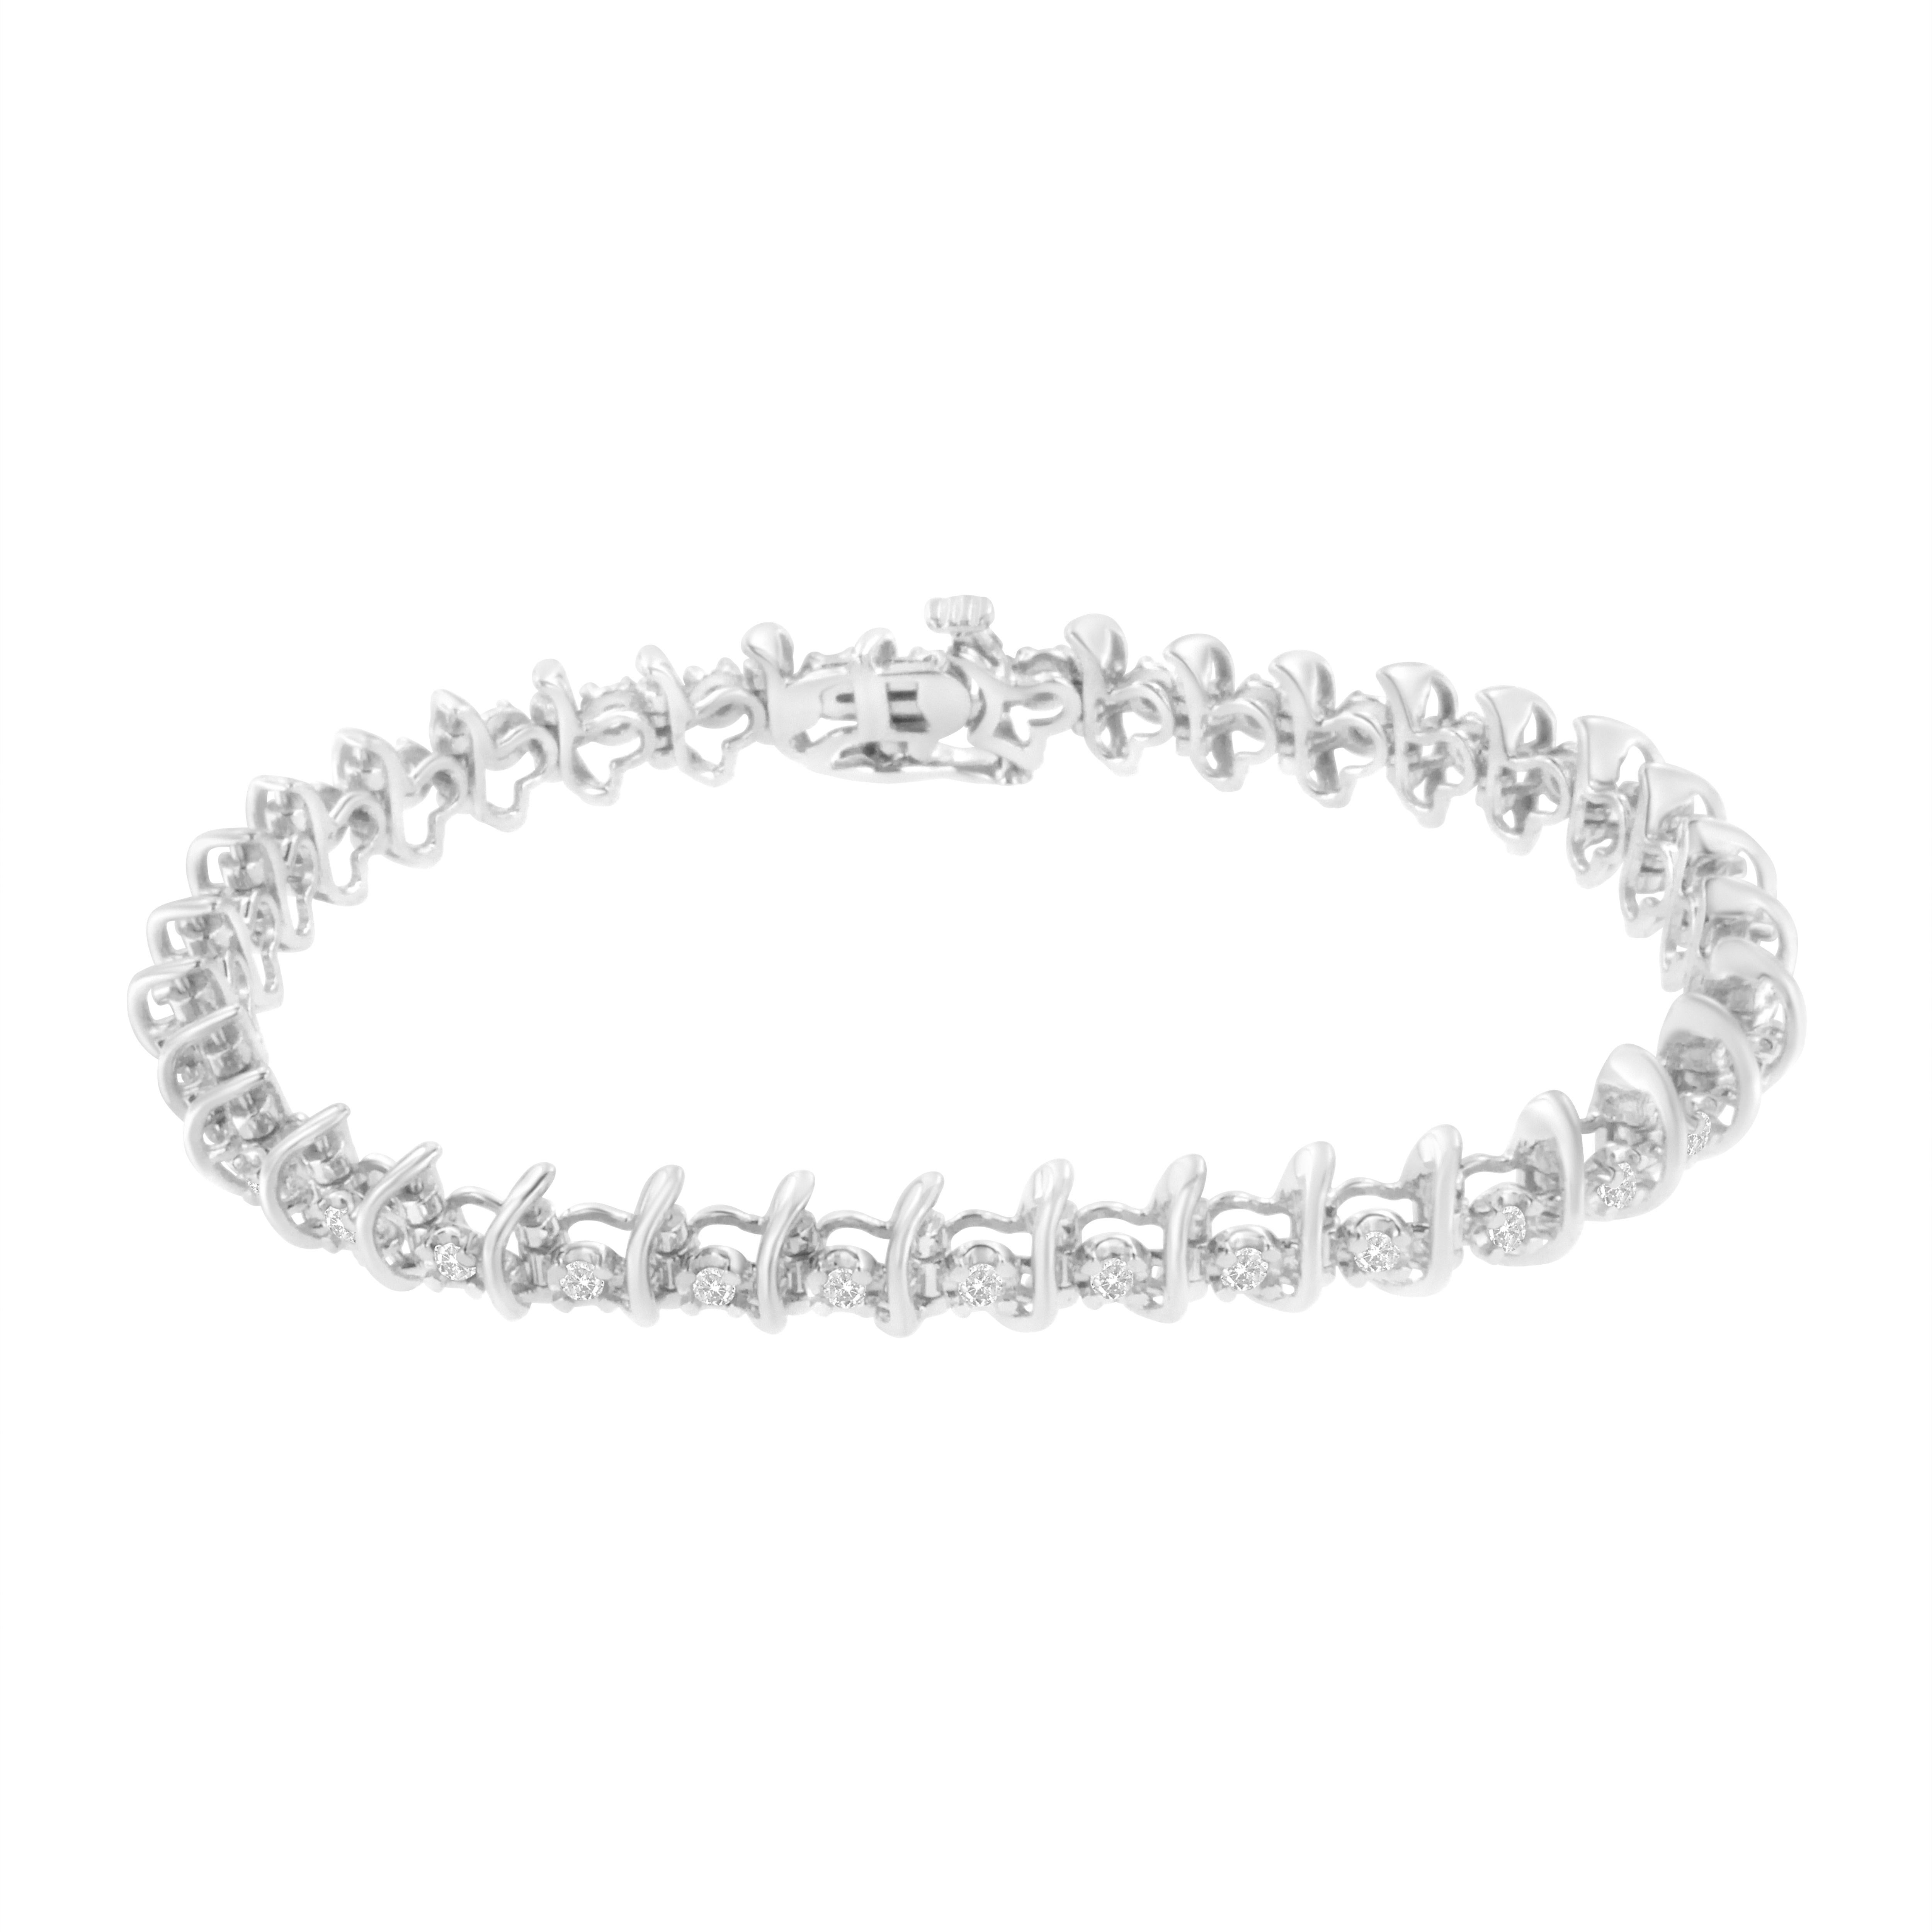 This stunning sterling silver link bracelet features round cut diamonds that glitter along the length of the bracelet. The 1 carat TDW of prong set diamonds alternate with soft waving ribbons of cool sterling silver. The bracelet secures with a box